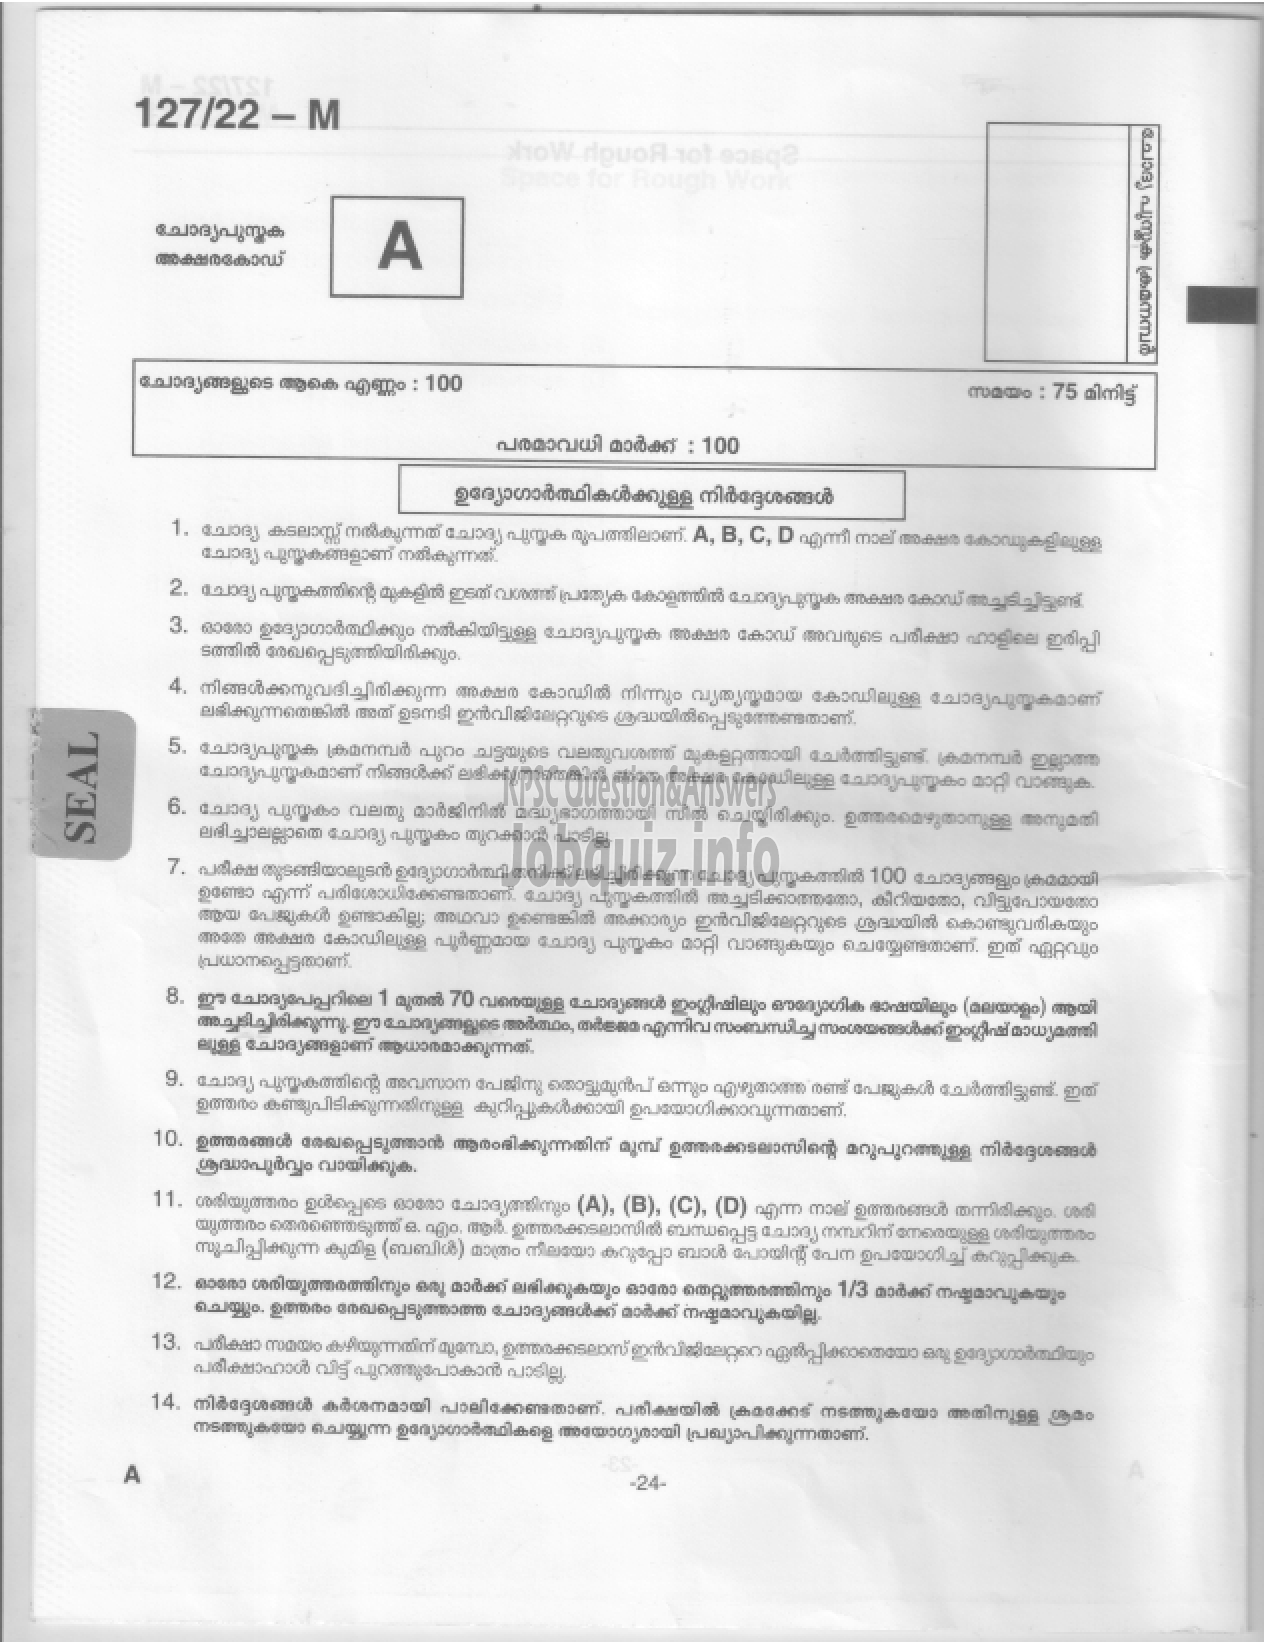 Kerala PSC Question Paper - Common Preliminary Examination 2022 (Graduate Level)- Stage III-1